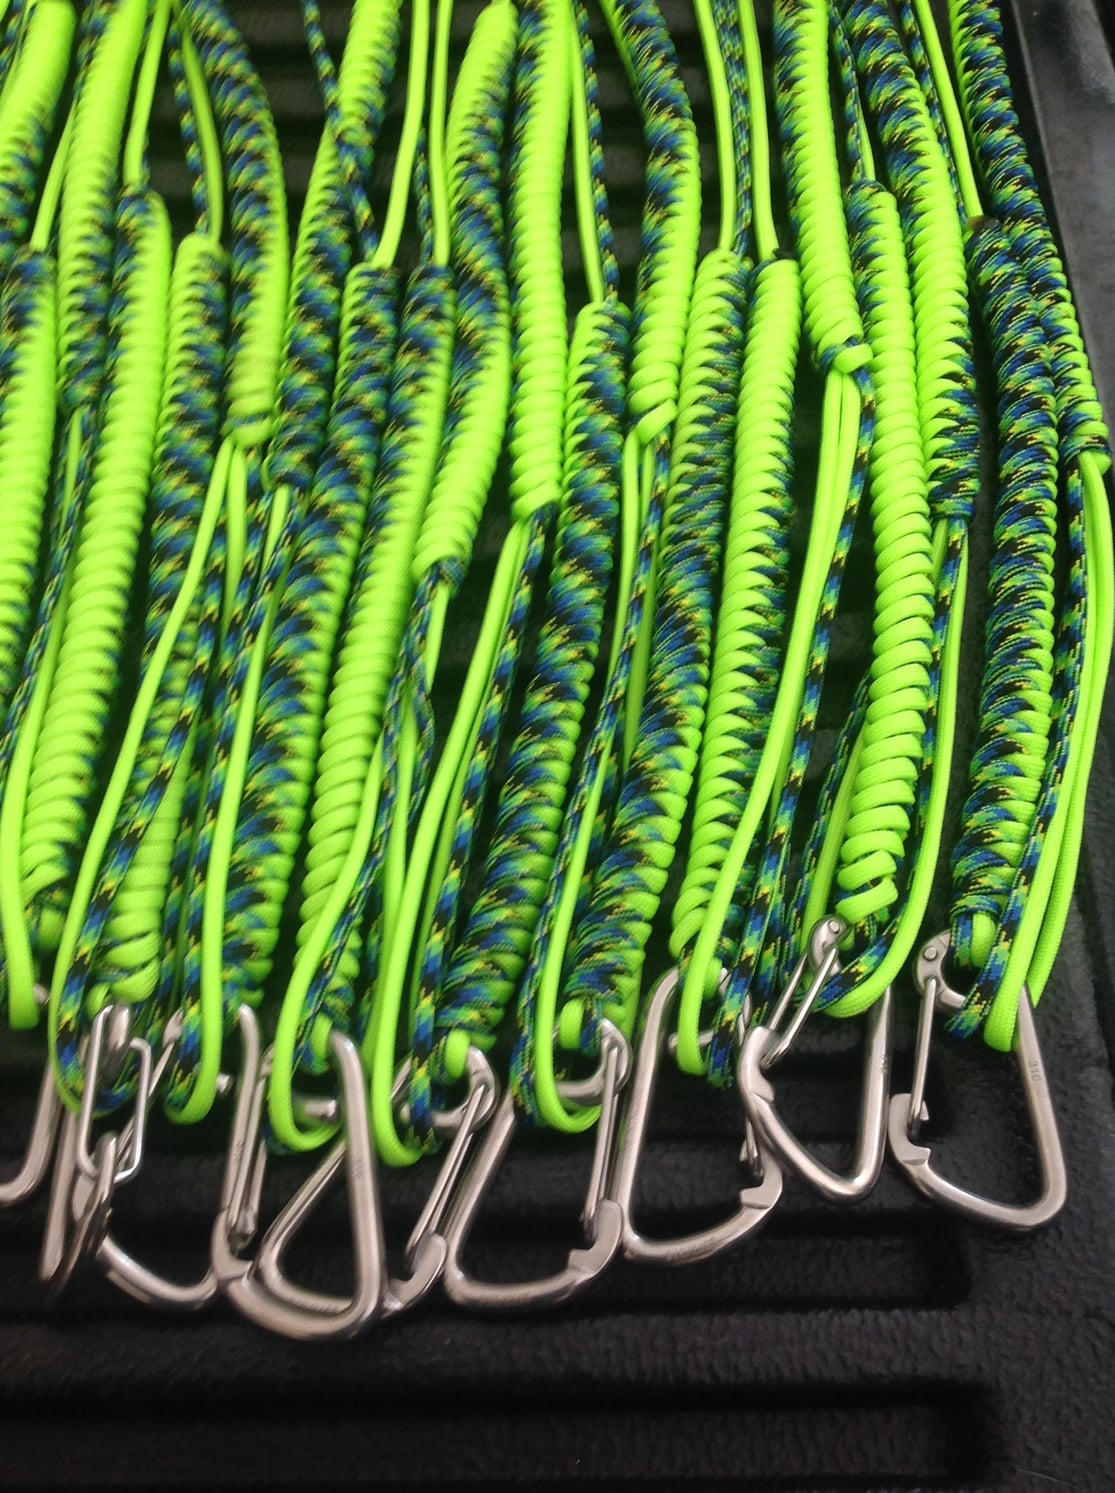 Rod leashes 6' 16.99 each,shipping is free The Hull